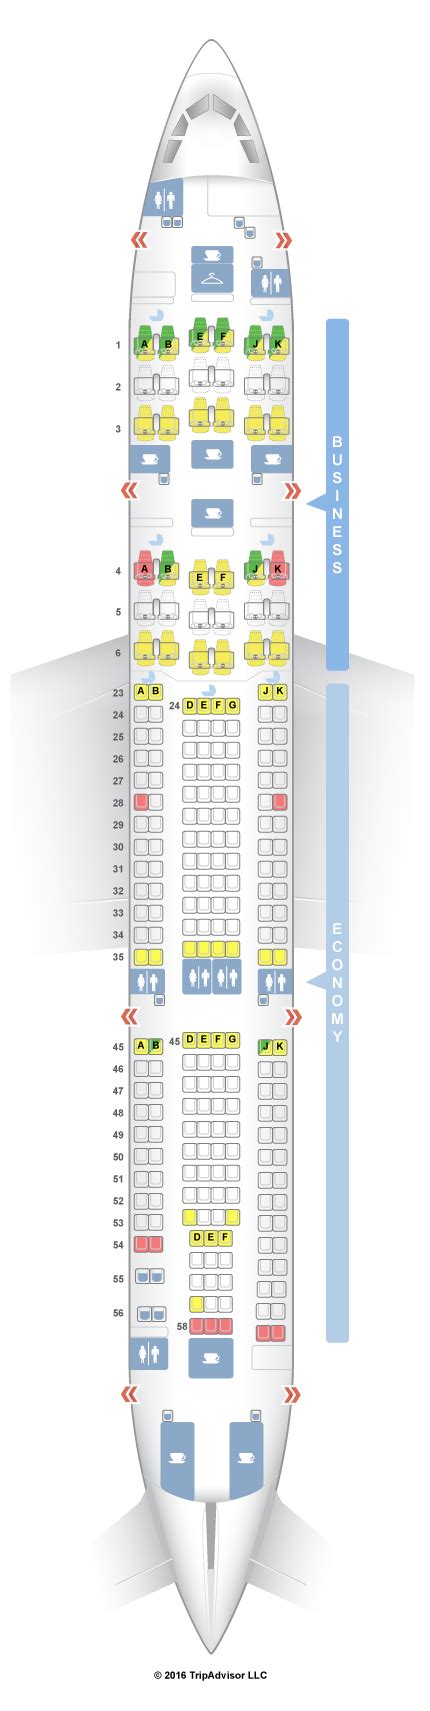 Airbus A Seating Plan Qantas Elcho Table Hot Sex Picture